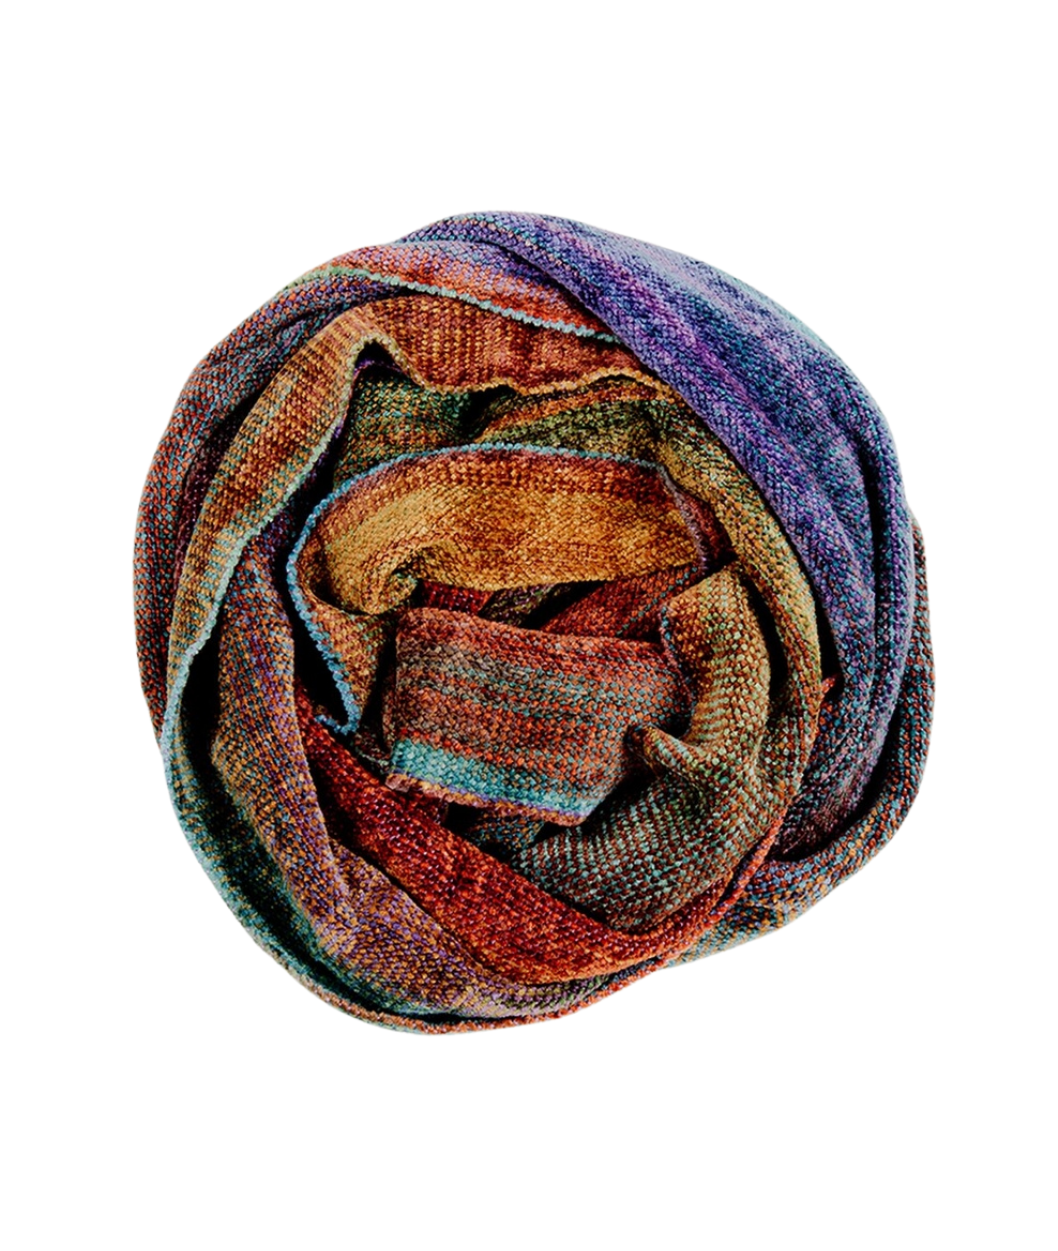 Handwoven Bamboo Chenille Infinity Scarf - Prism Mix